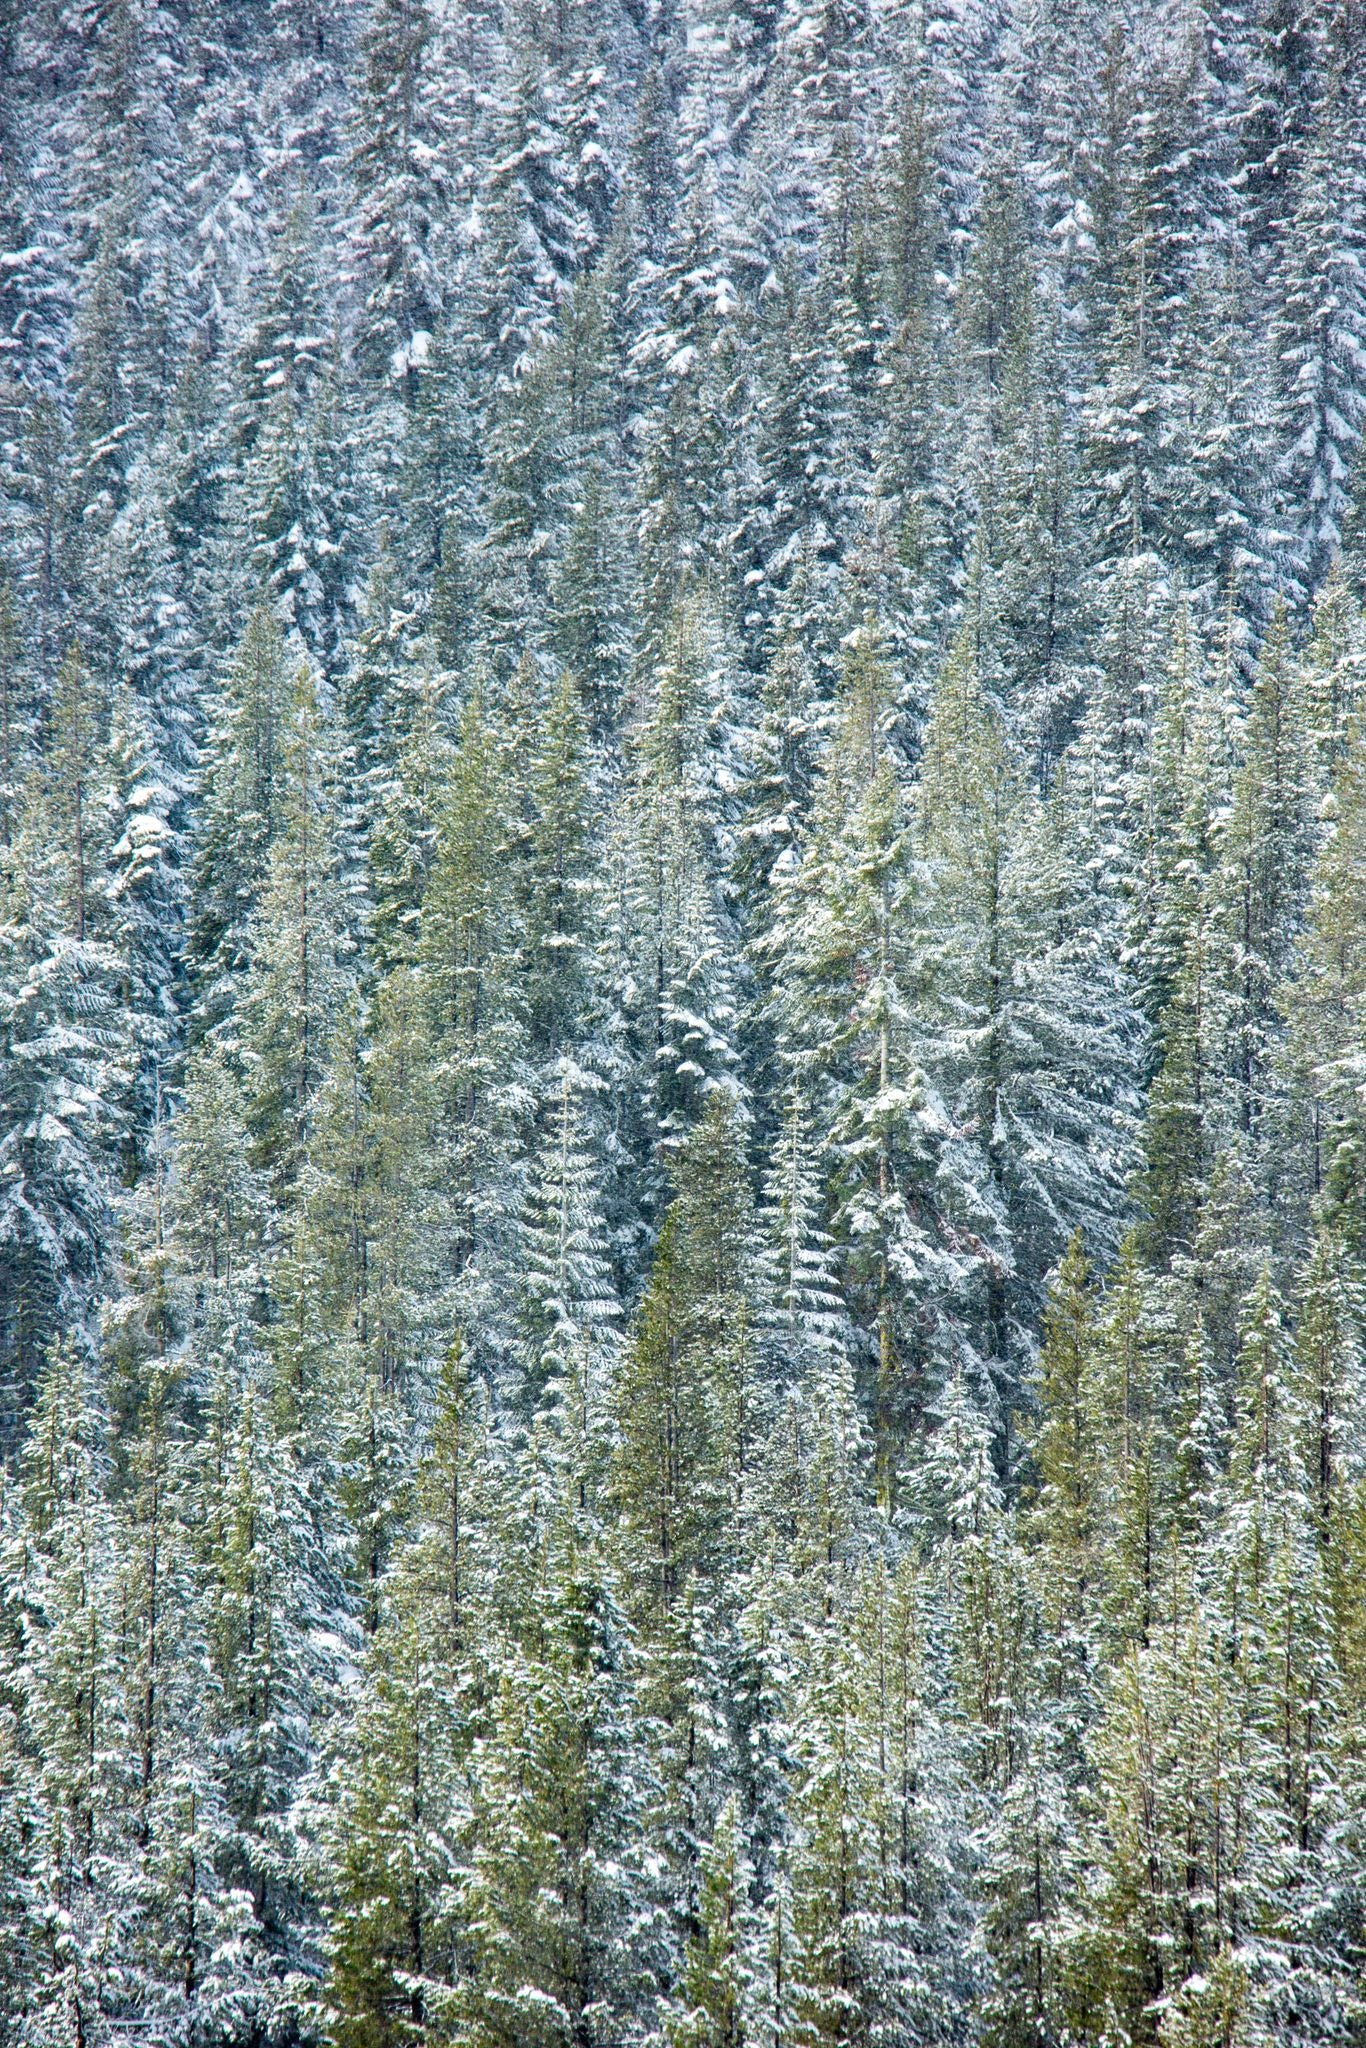 Pine trees dressed in a lighting of snow.